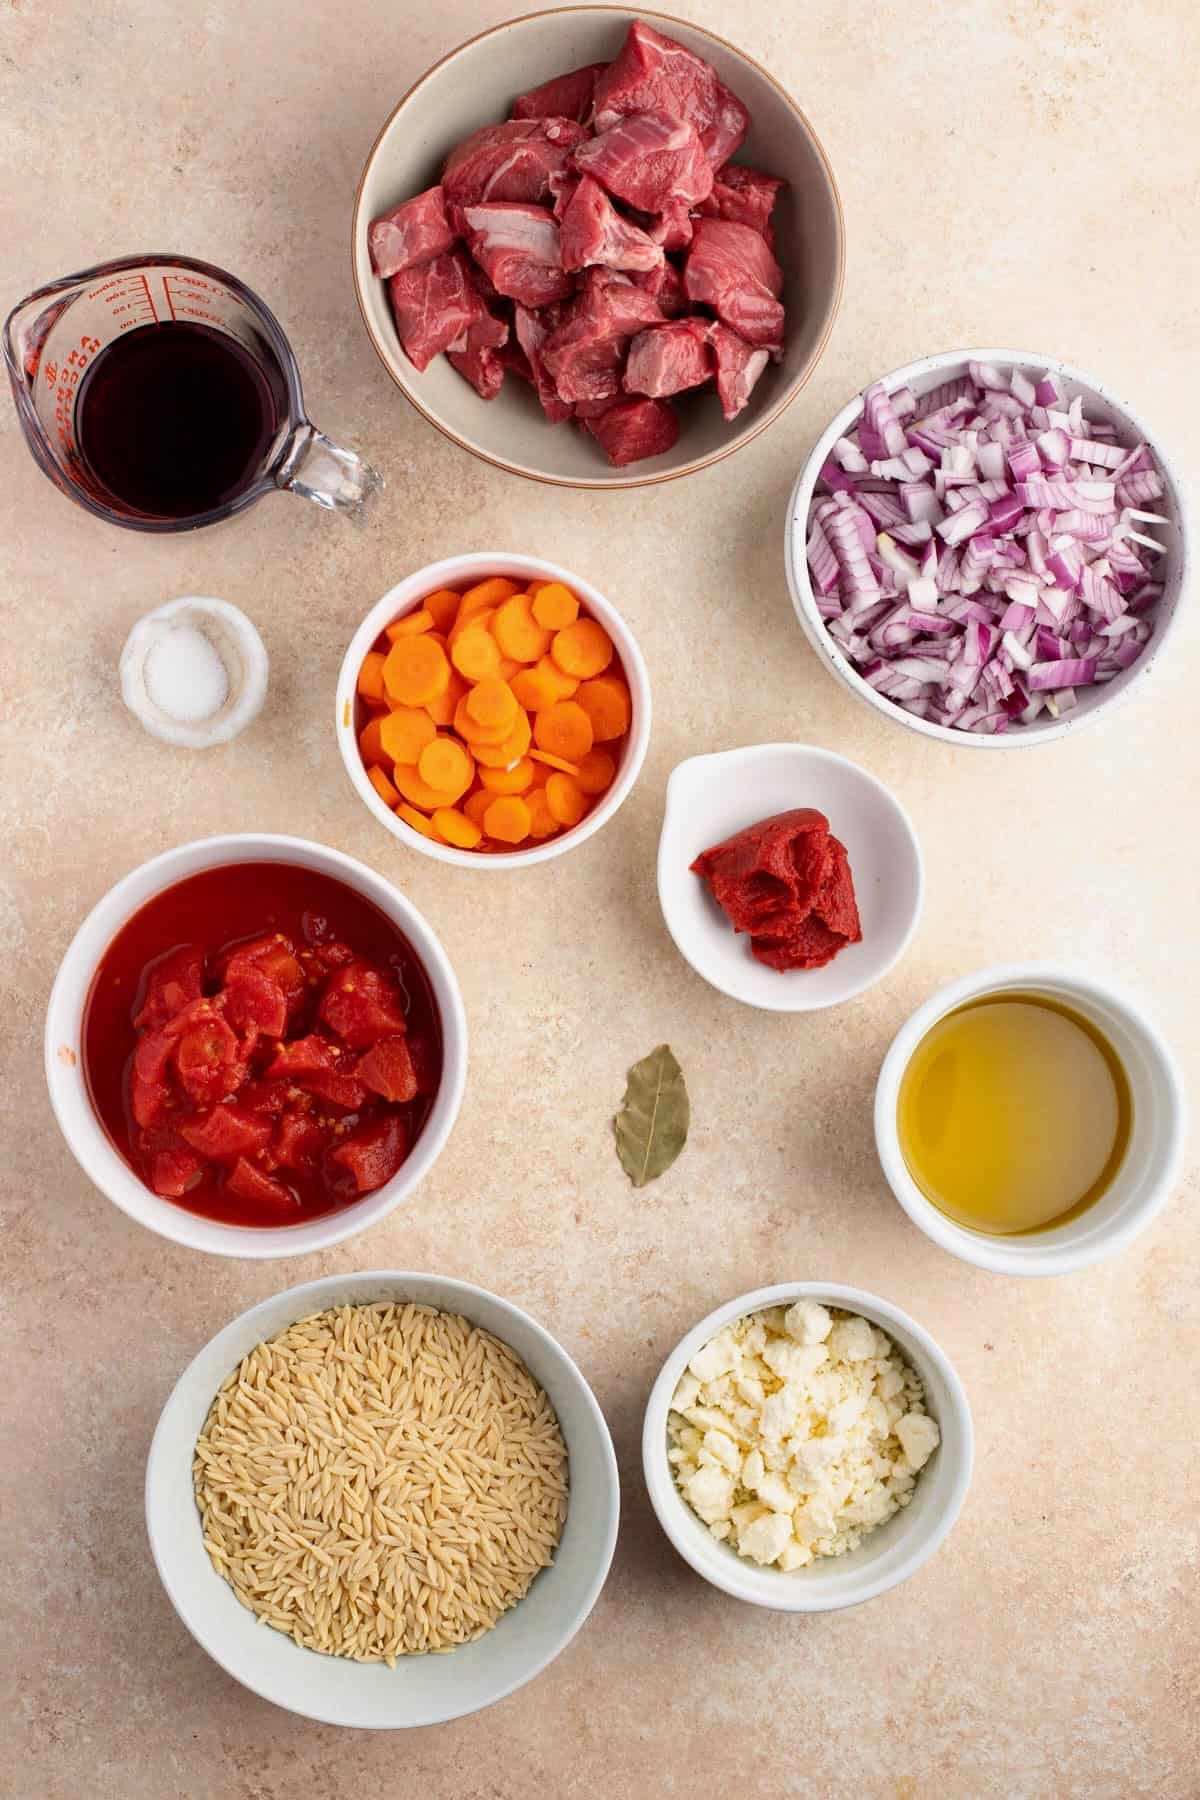 Ingredients for Greek Lamb stew with Orzo pasta (Lamb Giouvetsi)